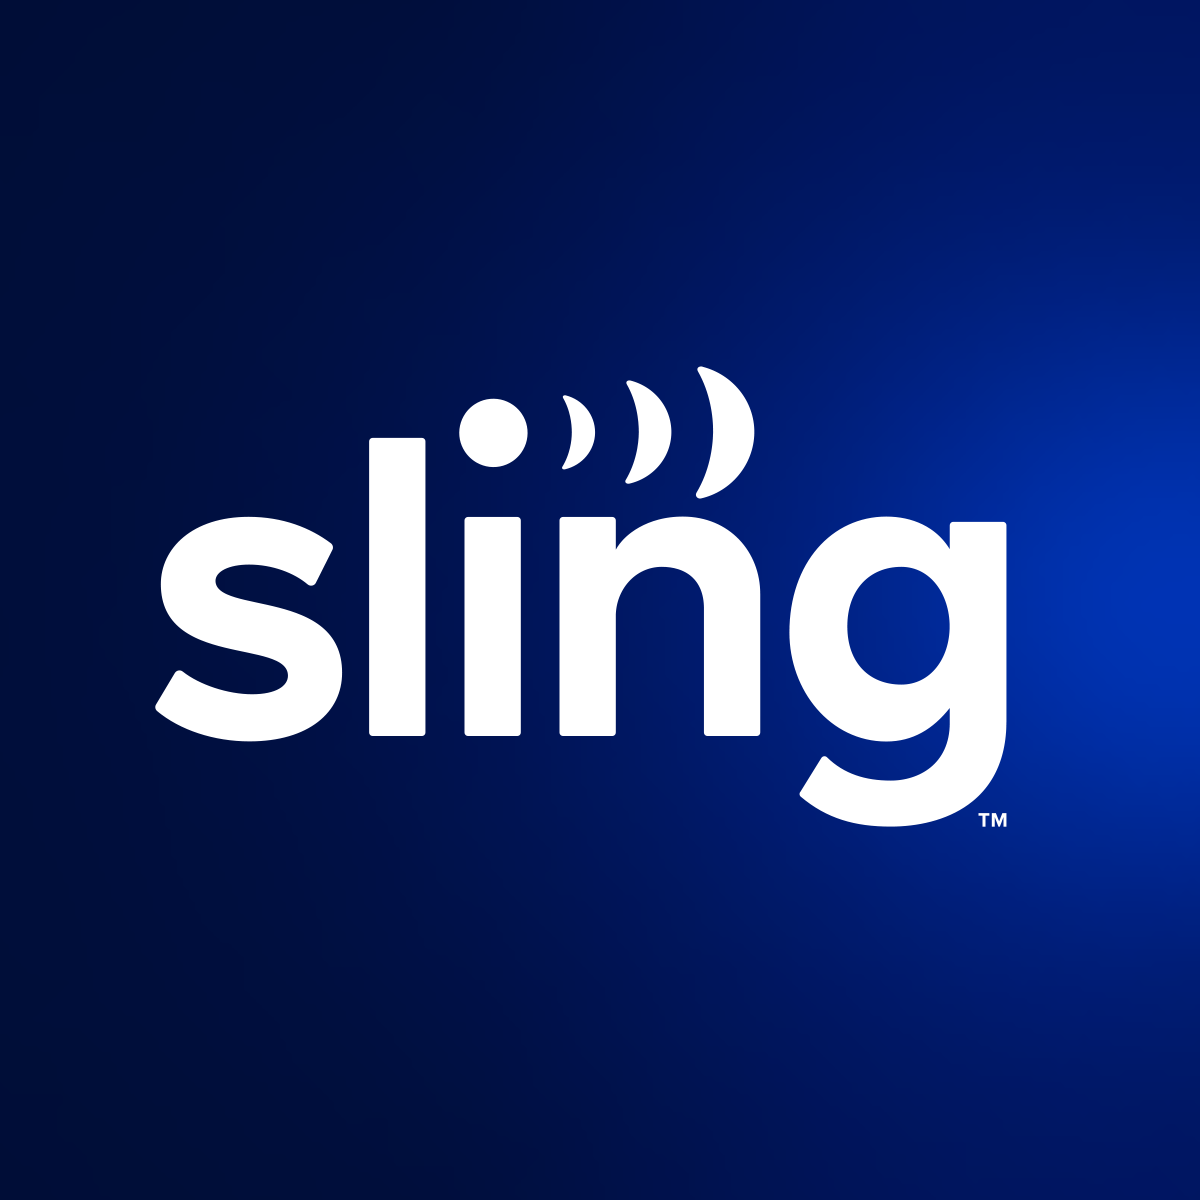 Watch American Major League Cricket (MLC) Live with Sling TV